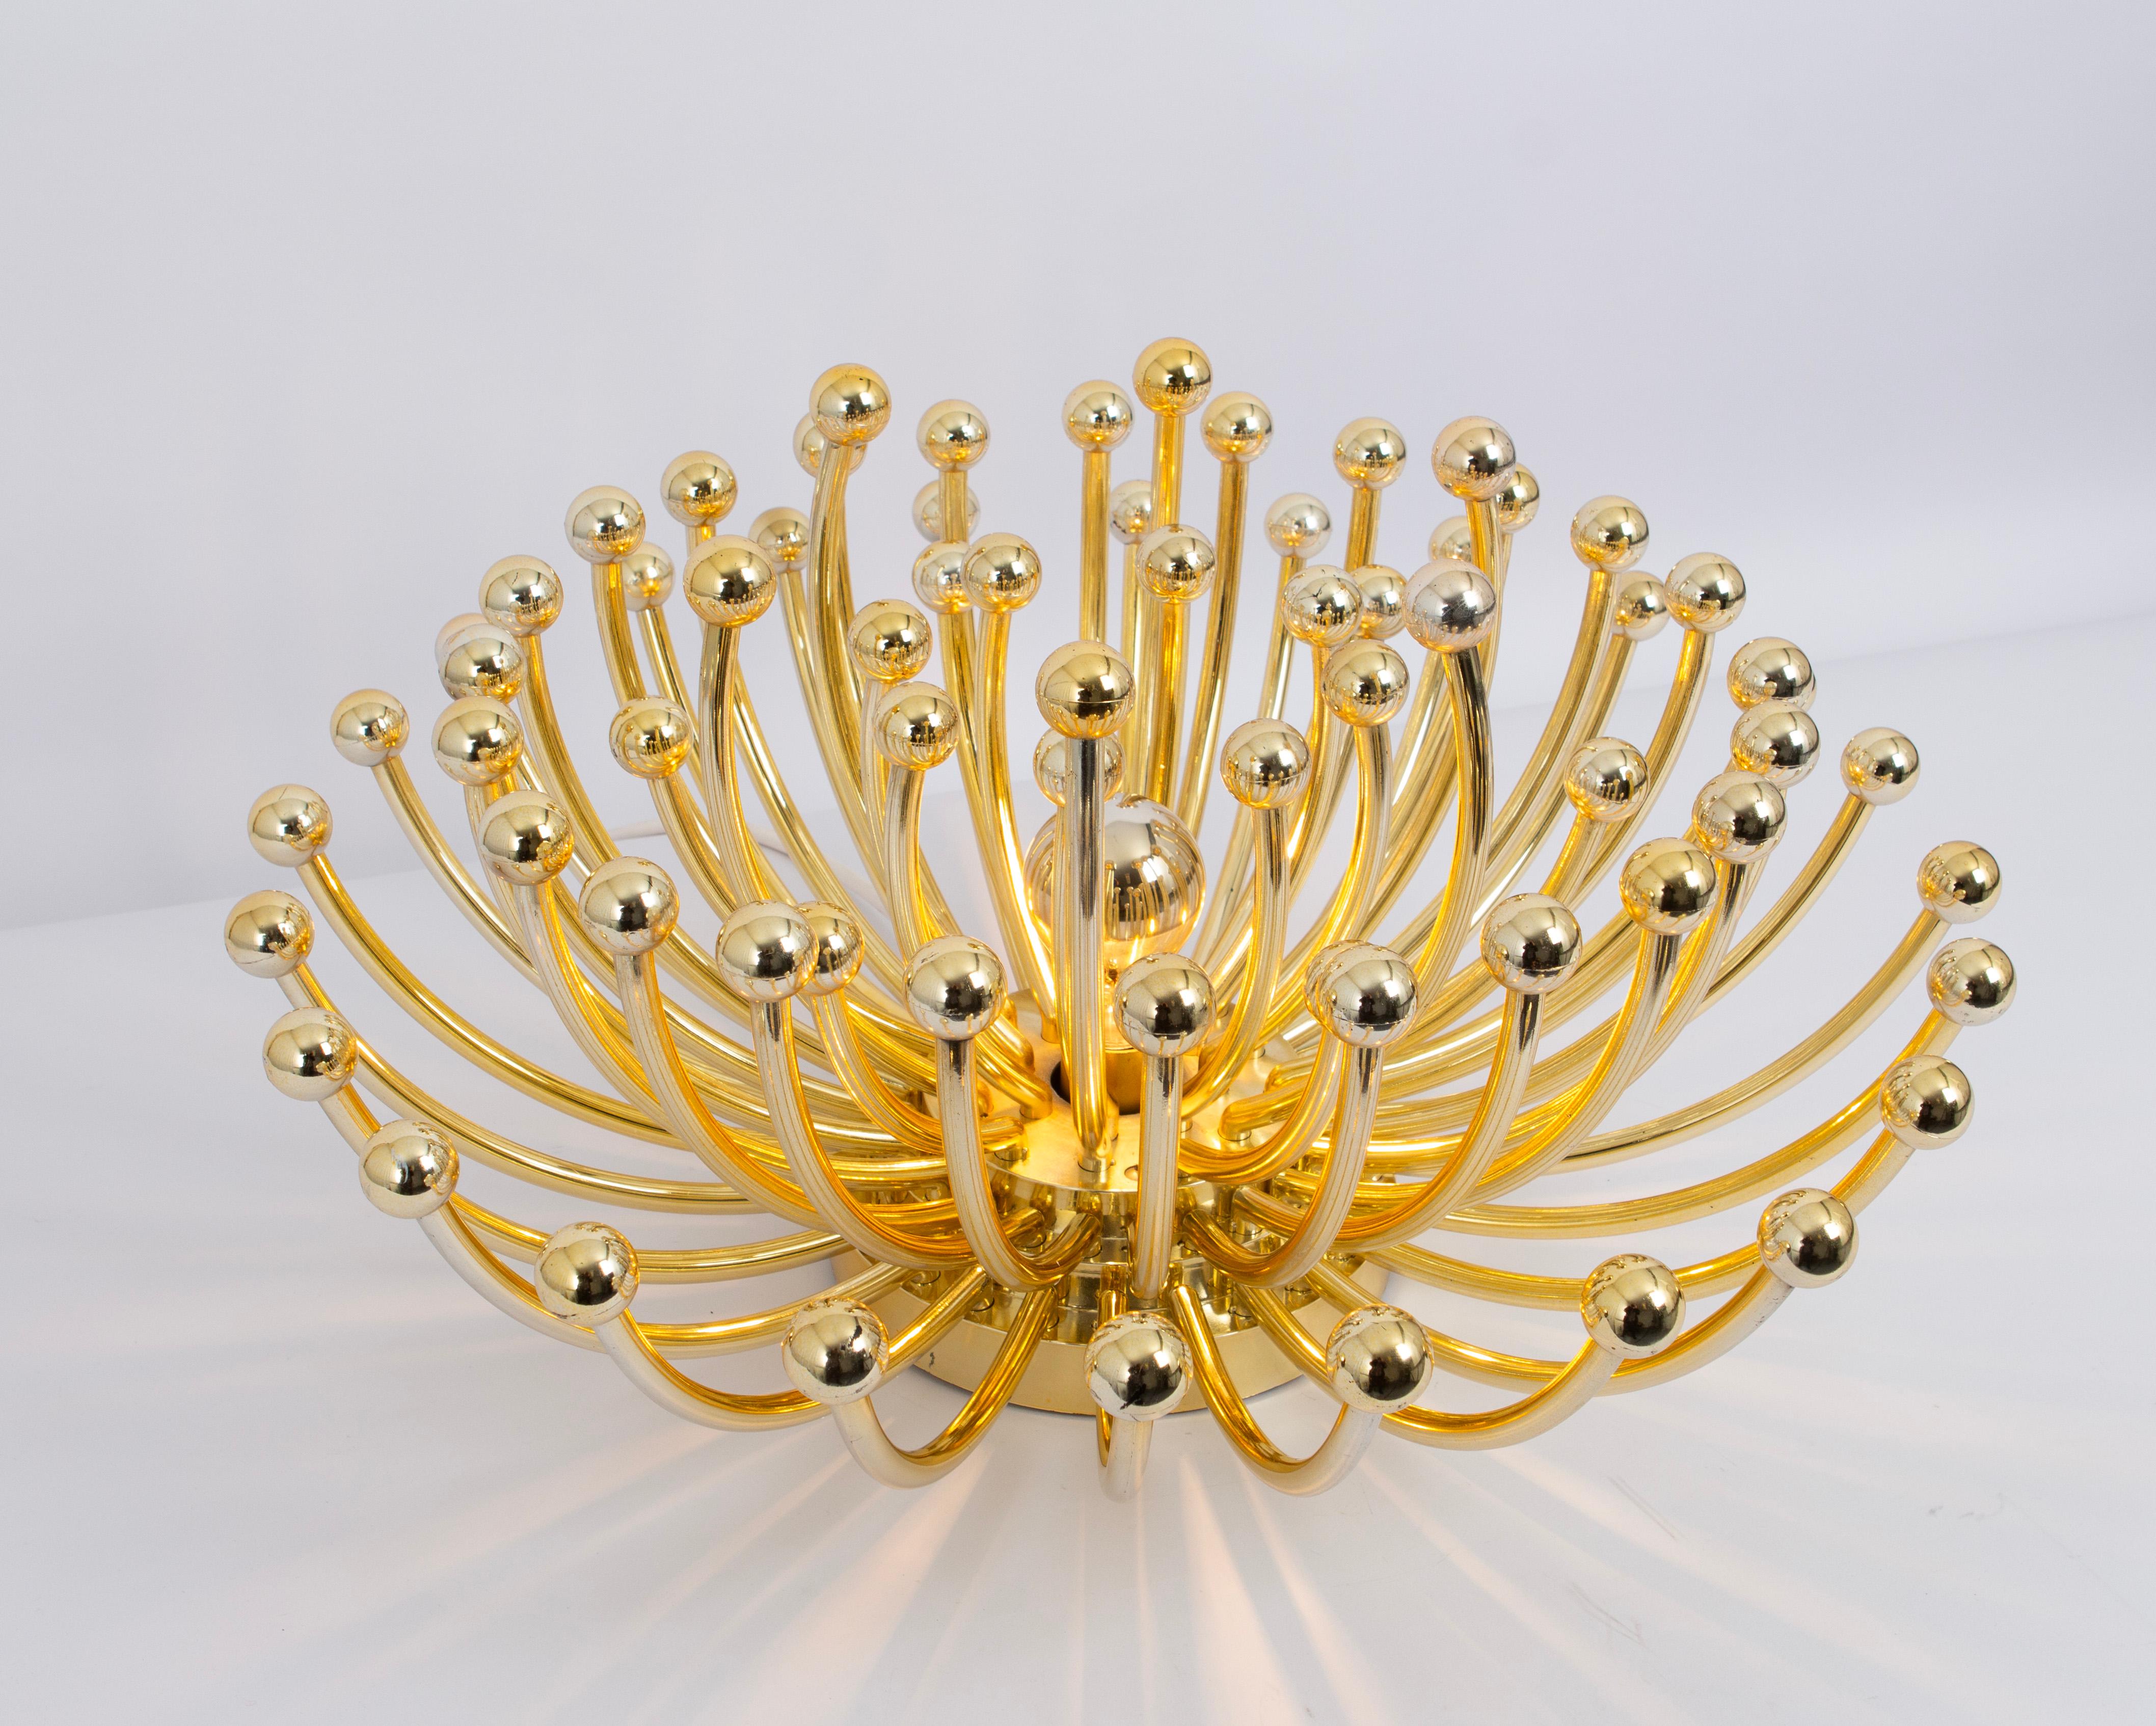 Other Large Pistillino Ceiling Light by Valenti Luce for Studio Tetrarch, 1970s For Sale